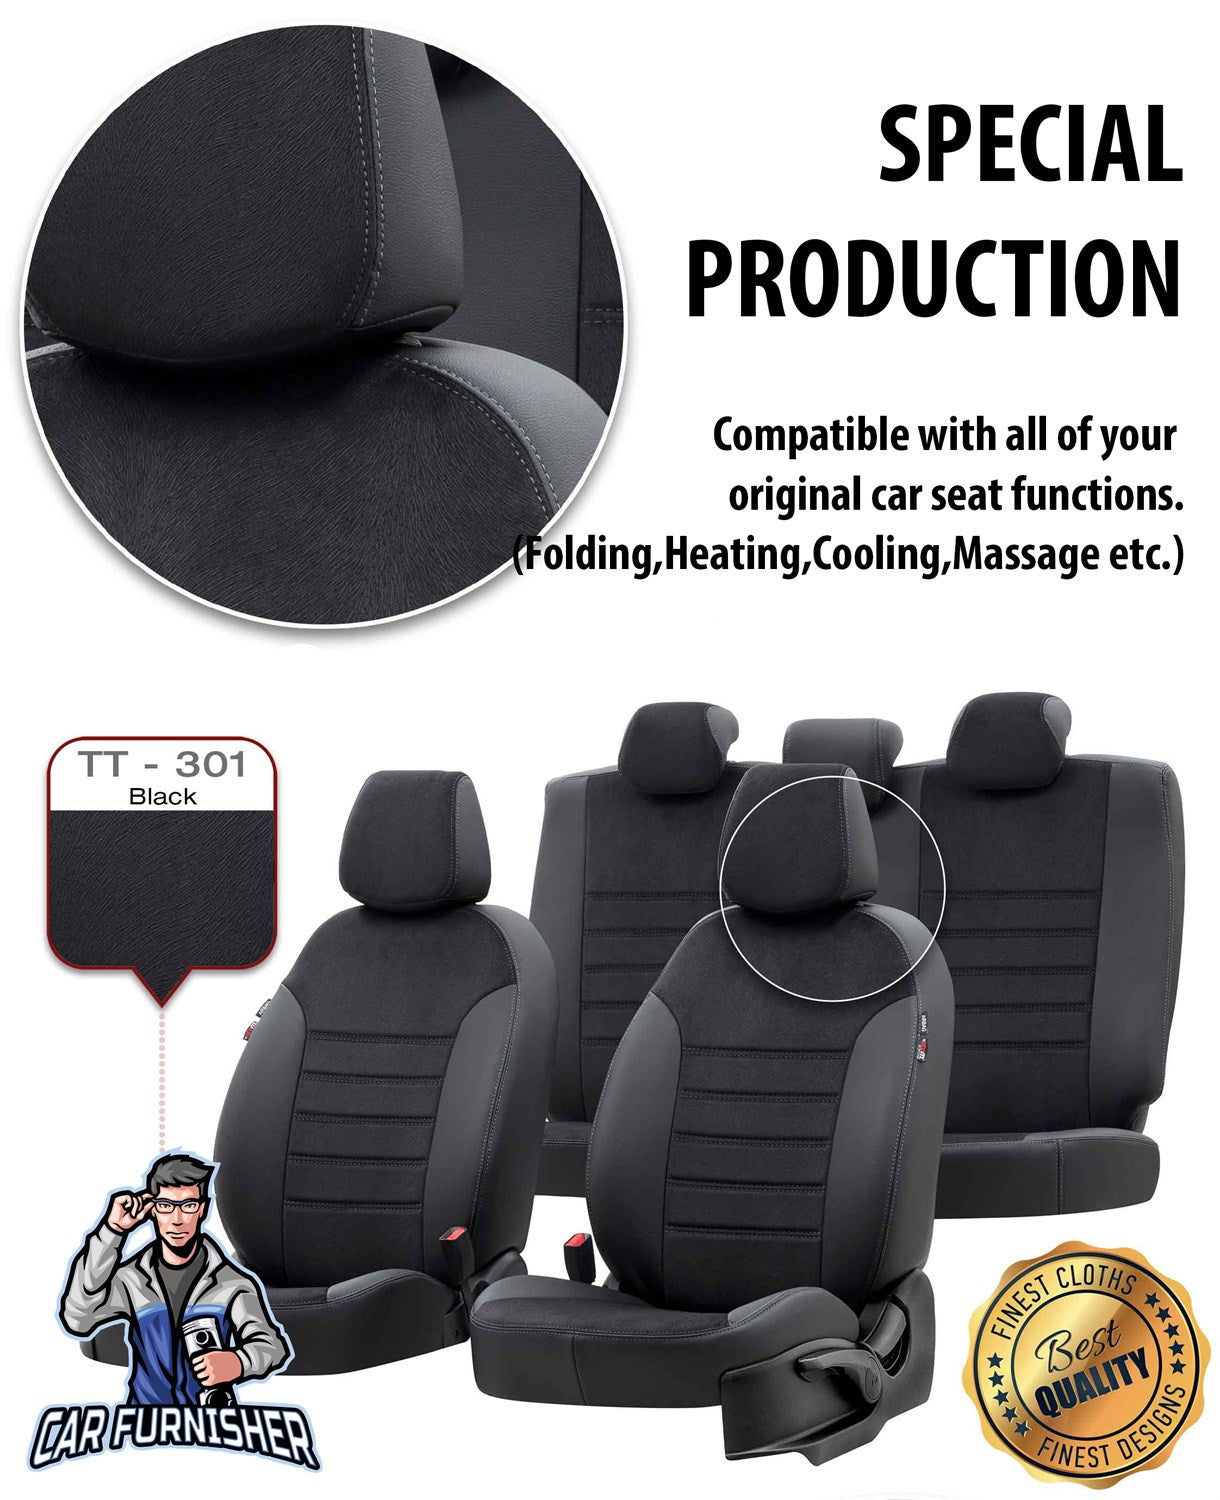 Geely Emgrand Seat Covers London Foal Feather Design Smoked Black Leather & Foal Feather